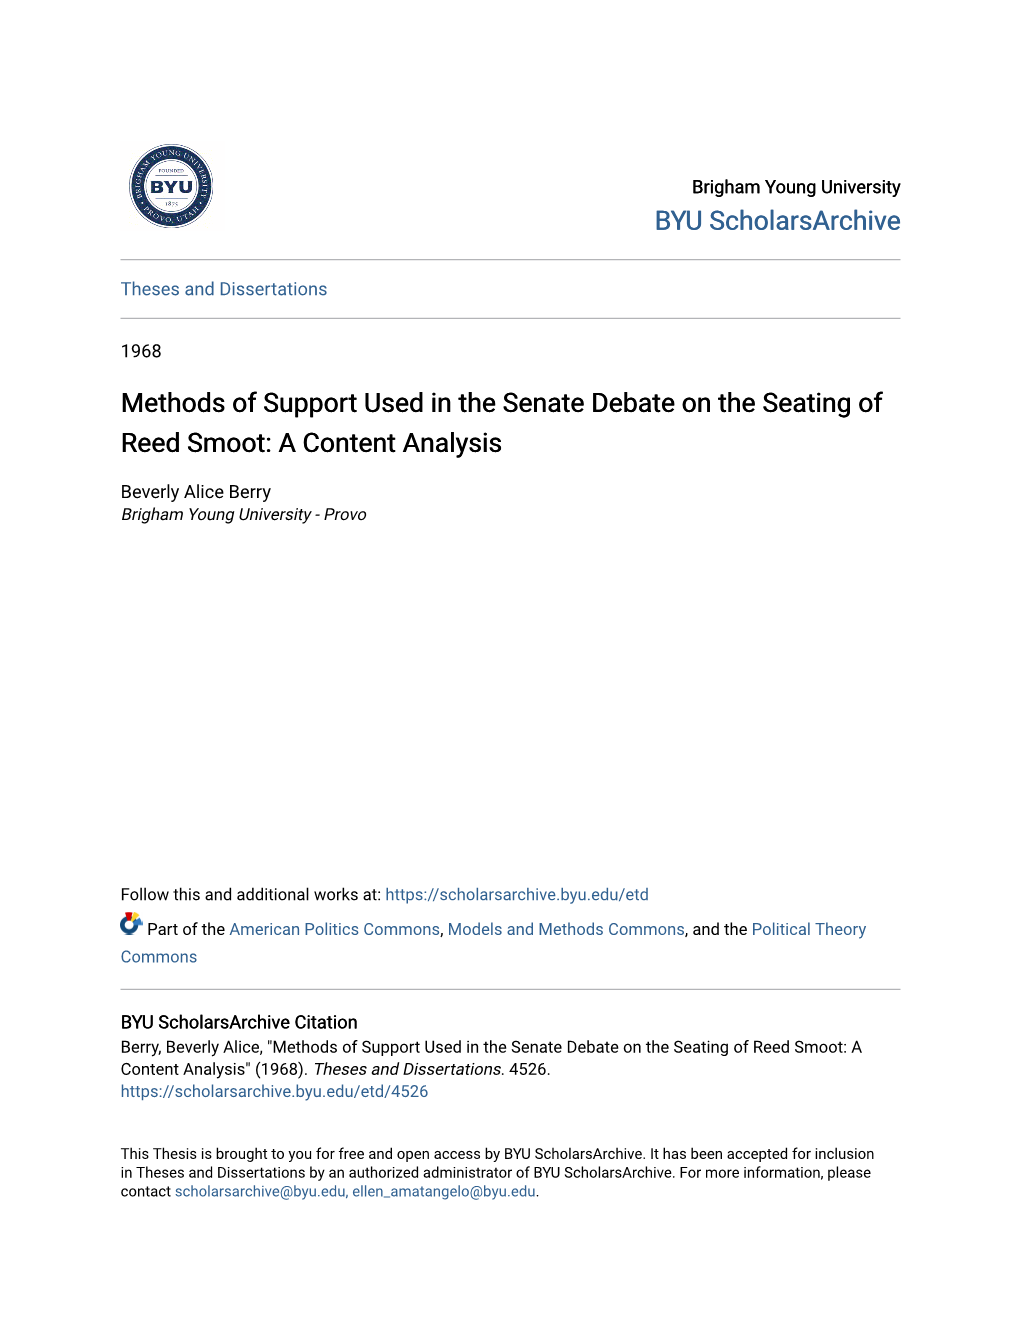 Methods of Support Used in the Senate Debate on the Seating of Reed Smoot: a Content Analysis